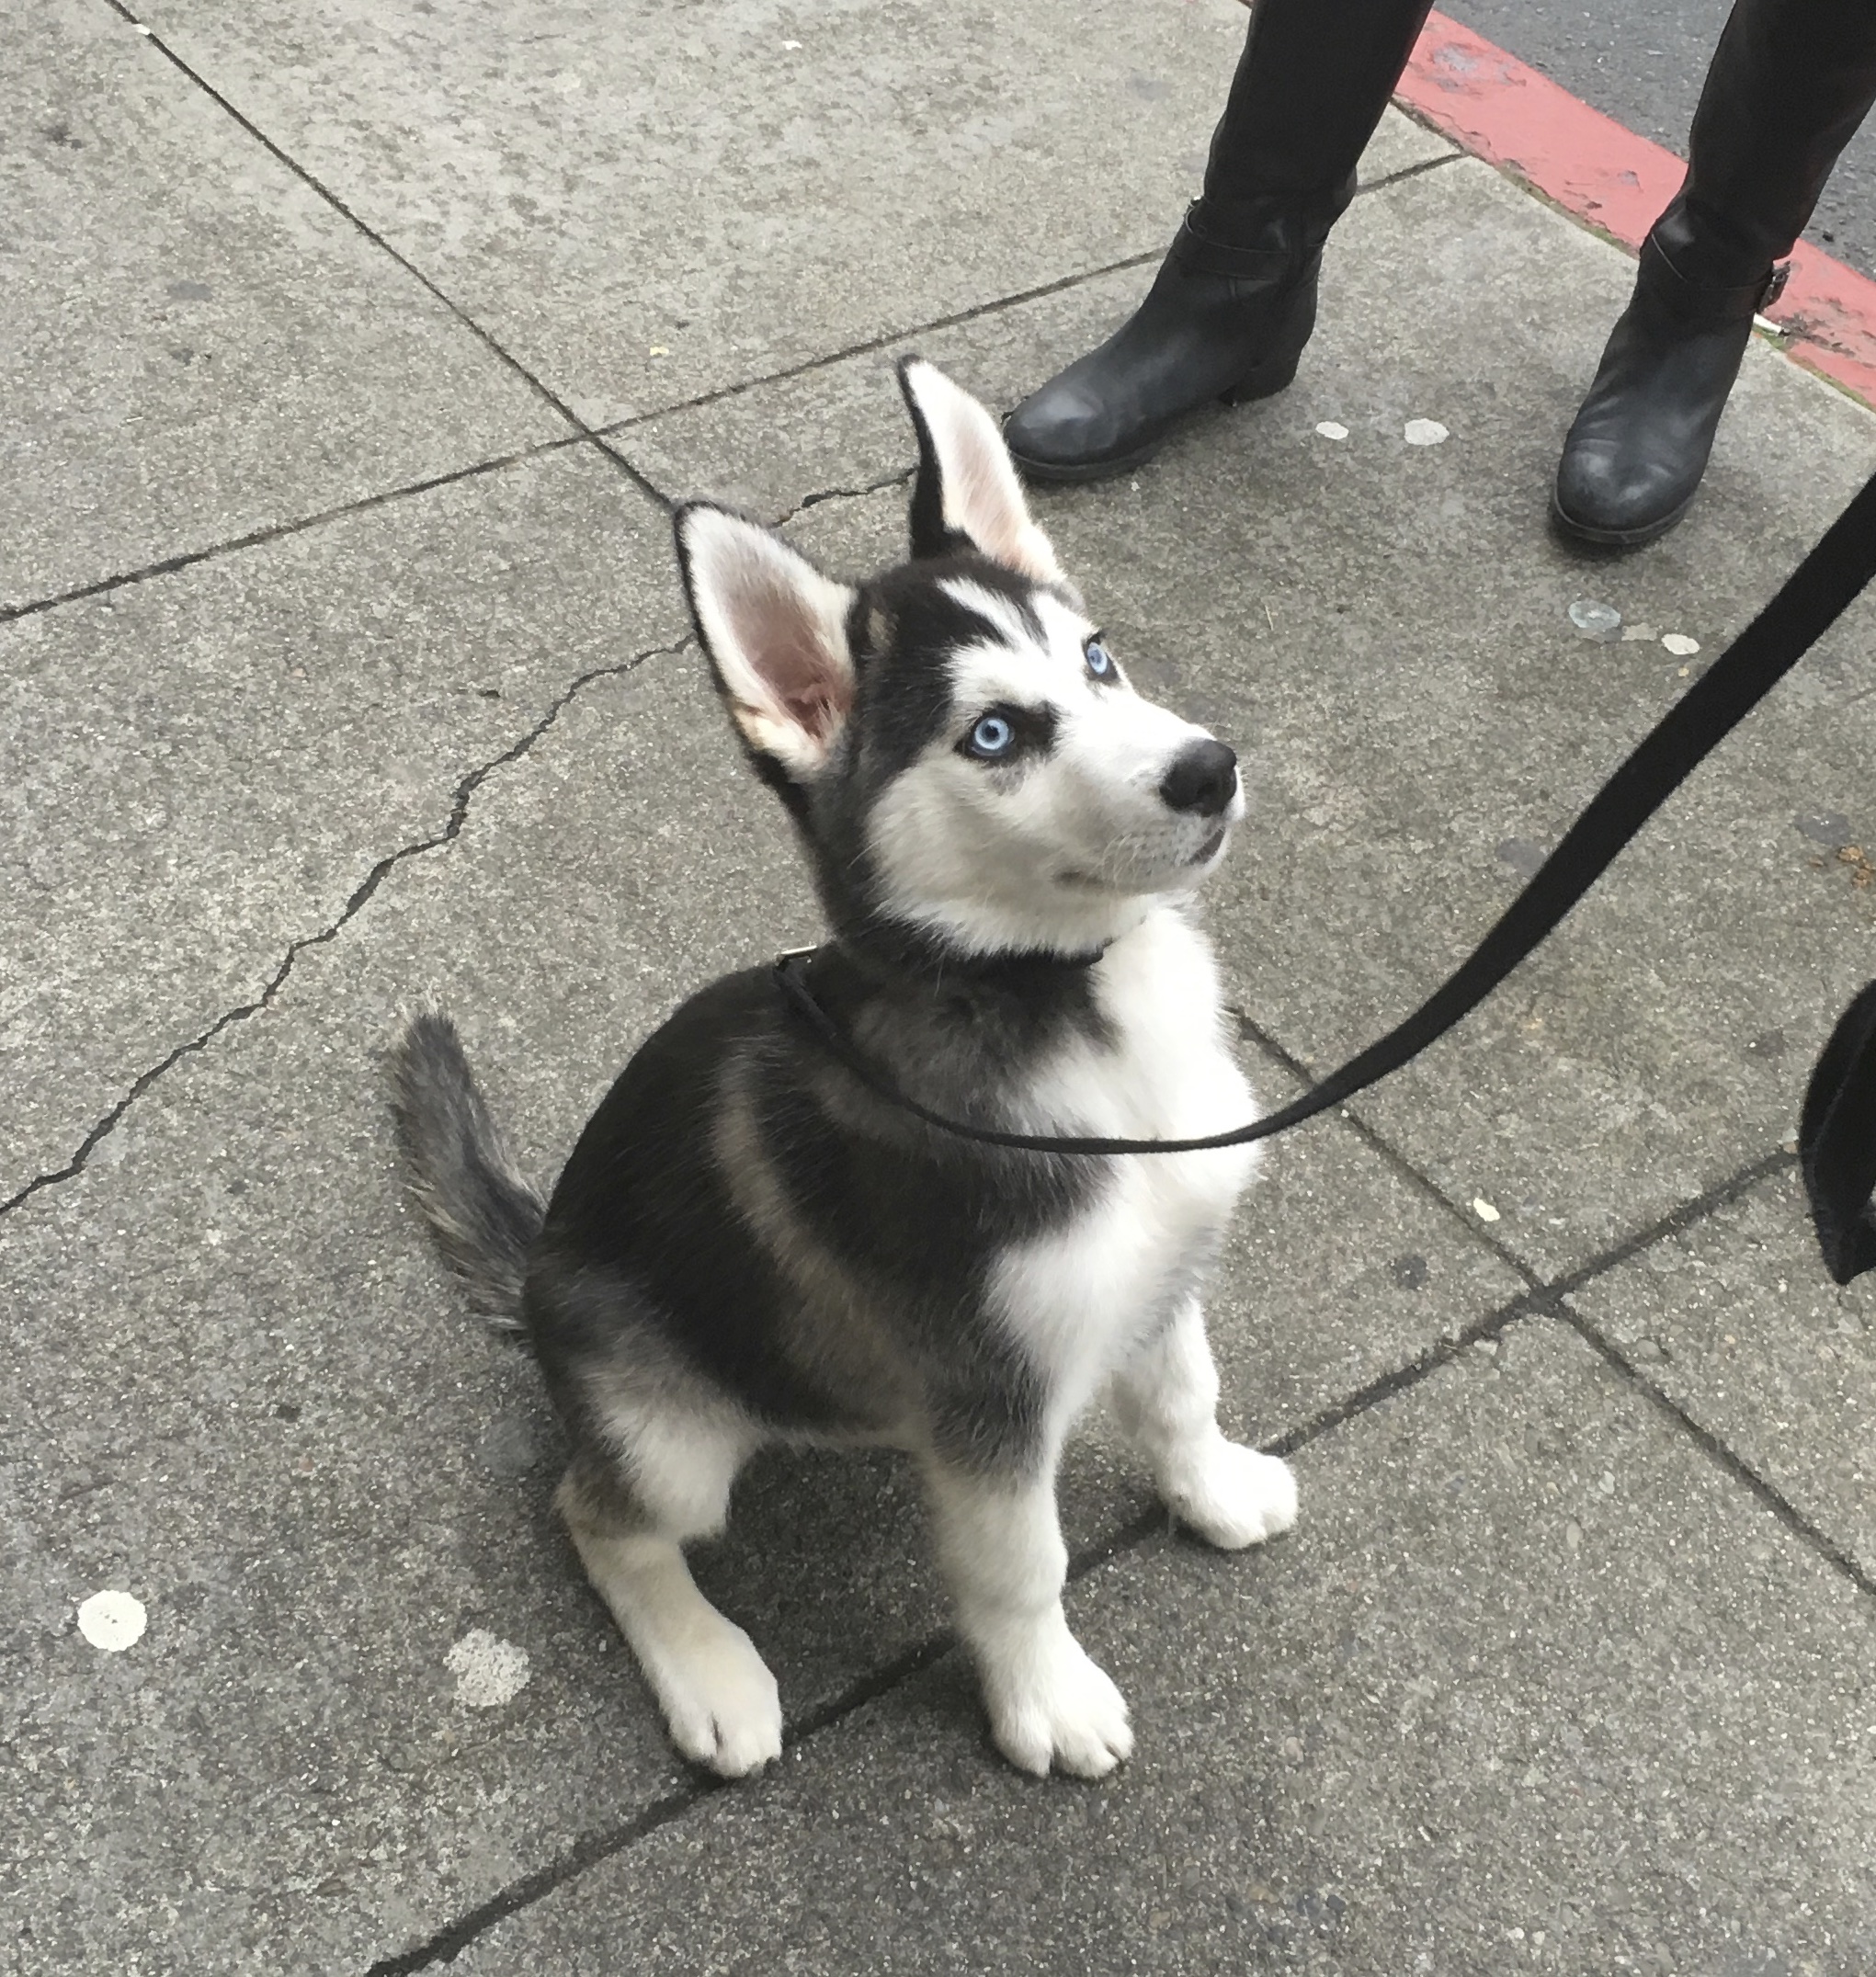 Thor, an Adorable 4 Month Old Siberian Husky Puppy